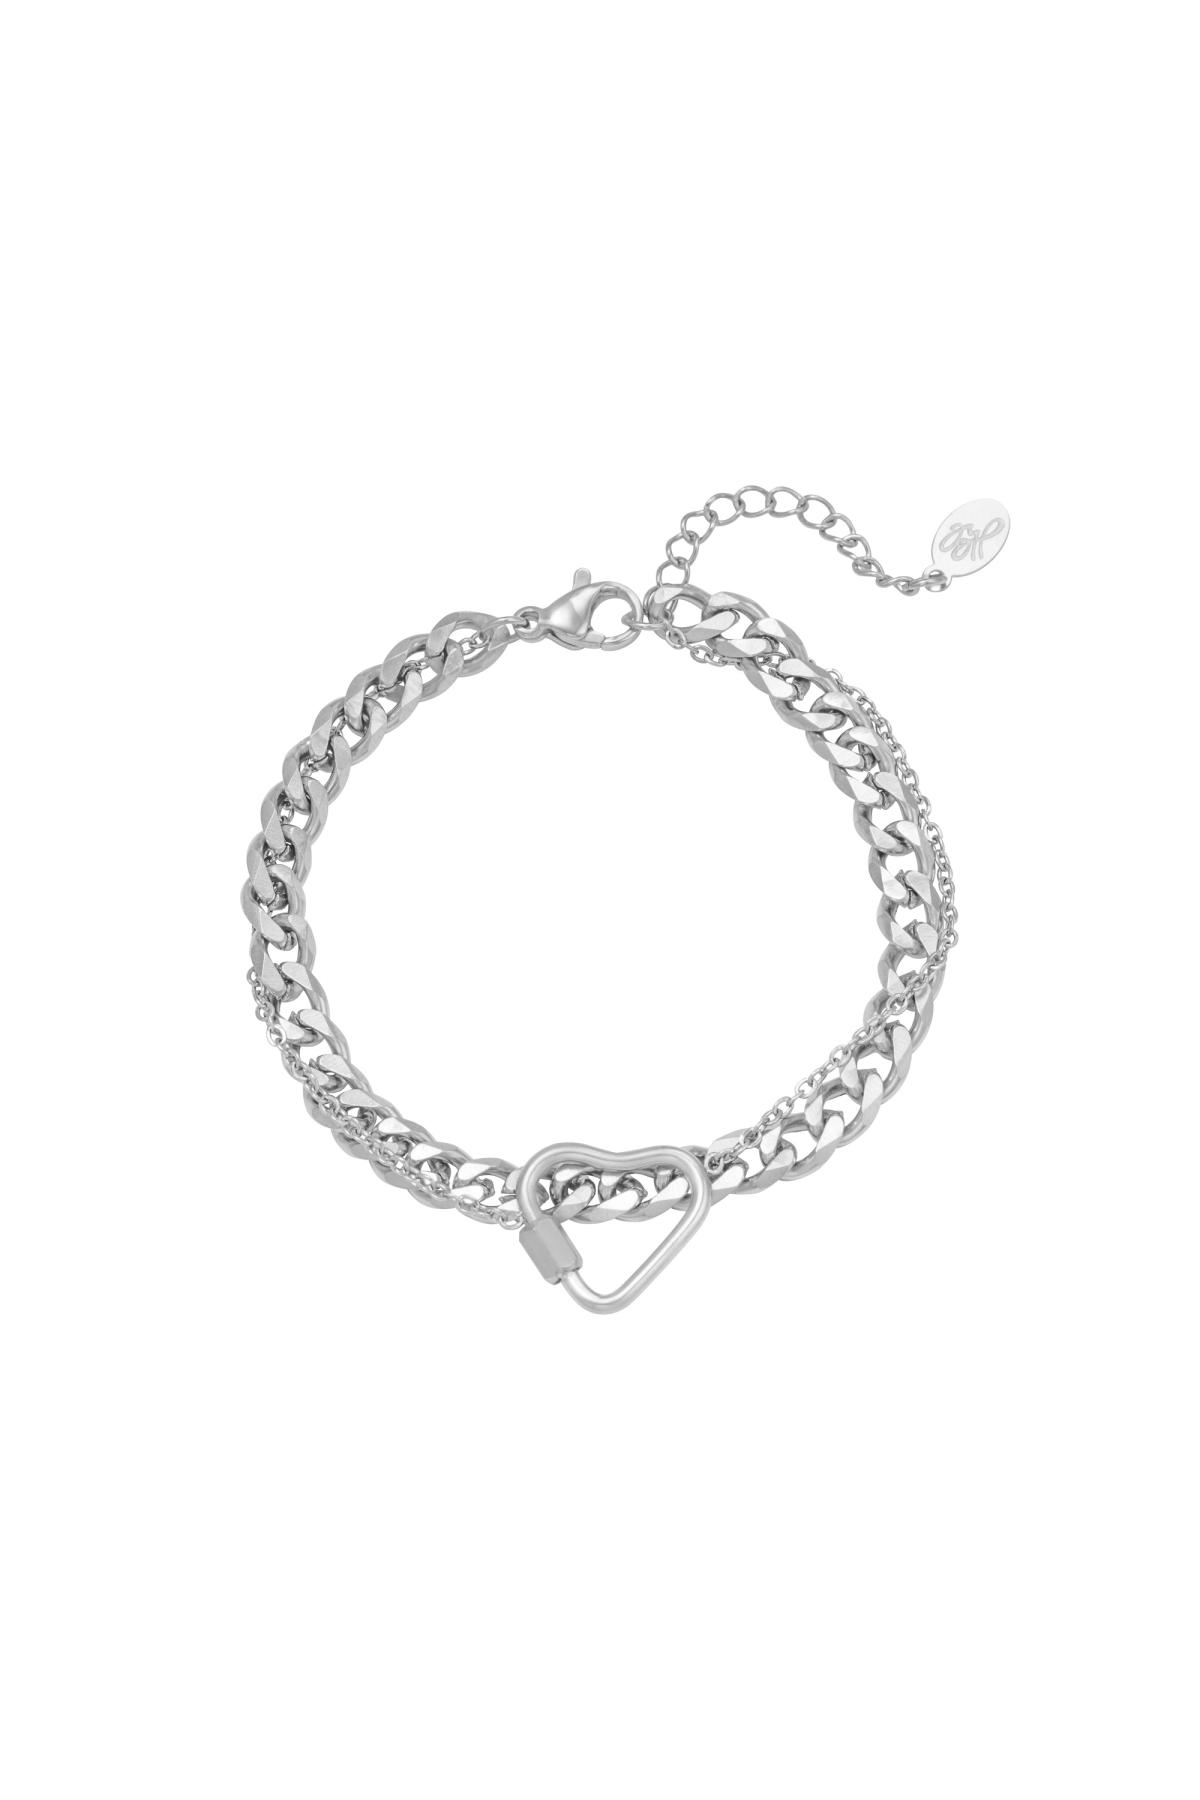 Silver / Bracelet Chained Heart Silver Stainless Steel 